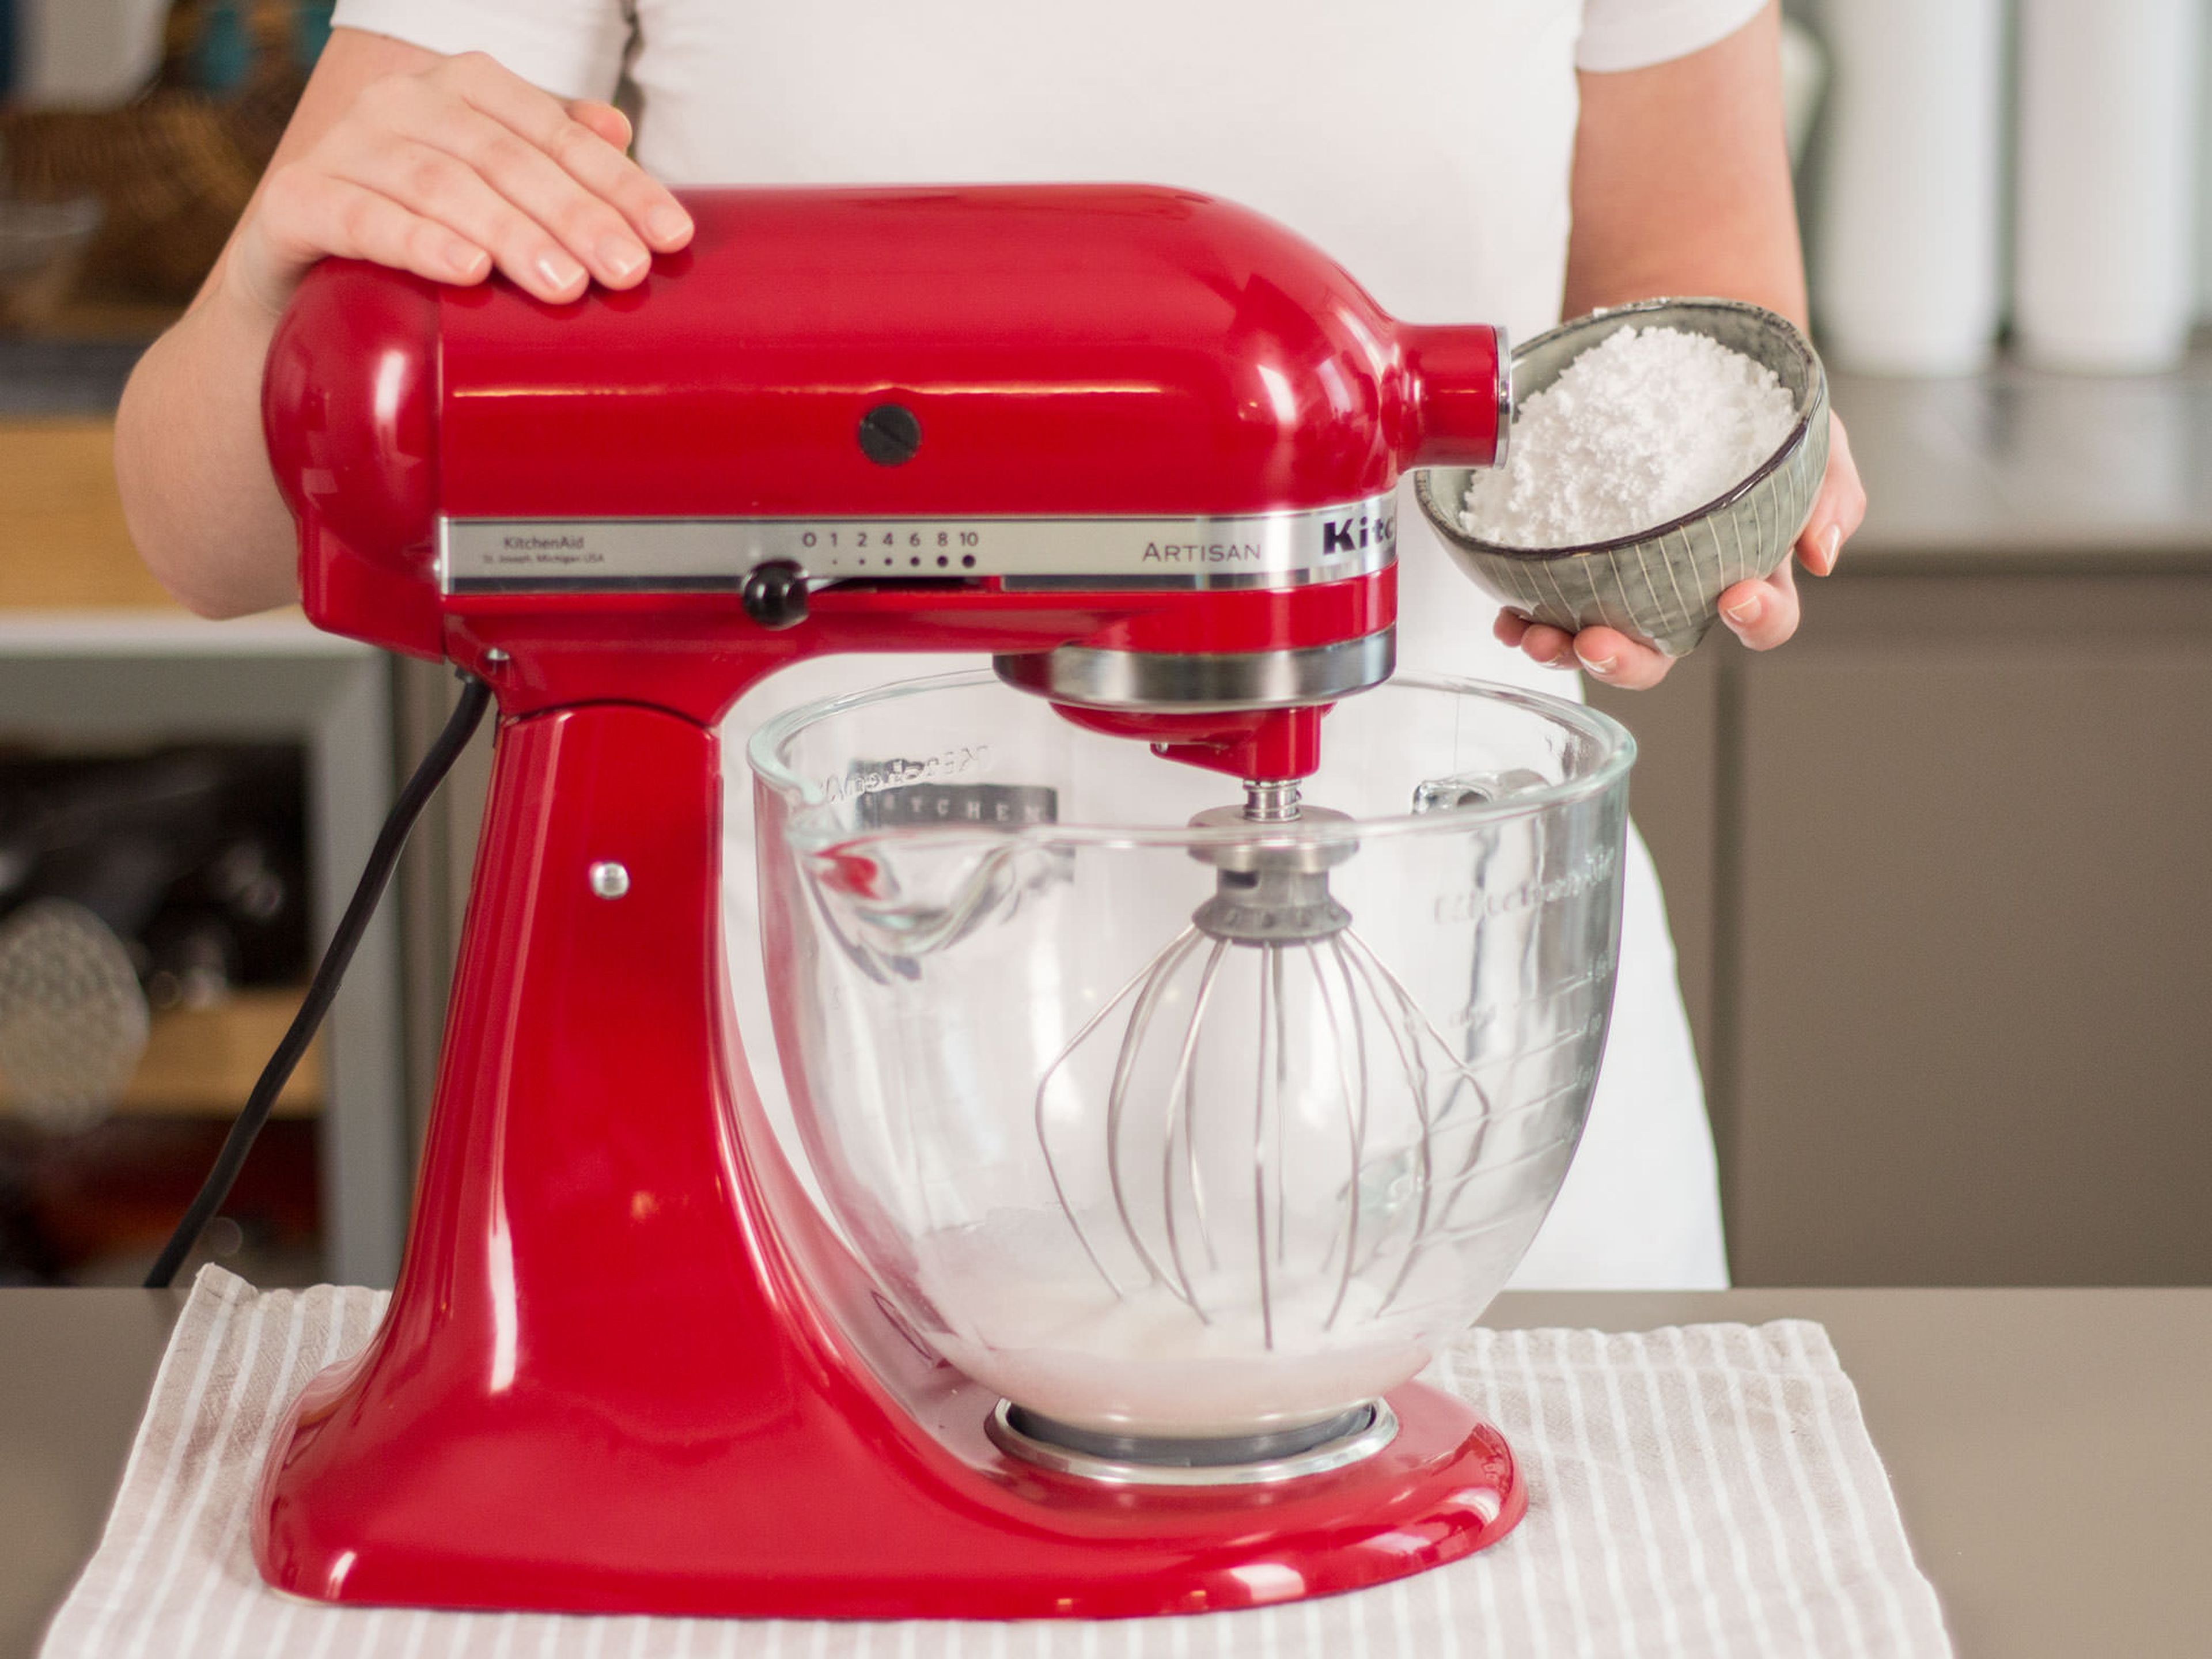 To make the meringue, separate remaining eggs. Add whites as well as remaining confectioner’s sugar to a clean mixer bowl. Beat until stiff peaks form.